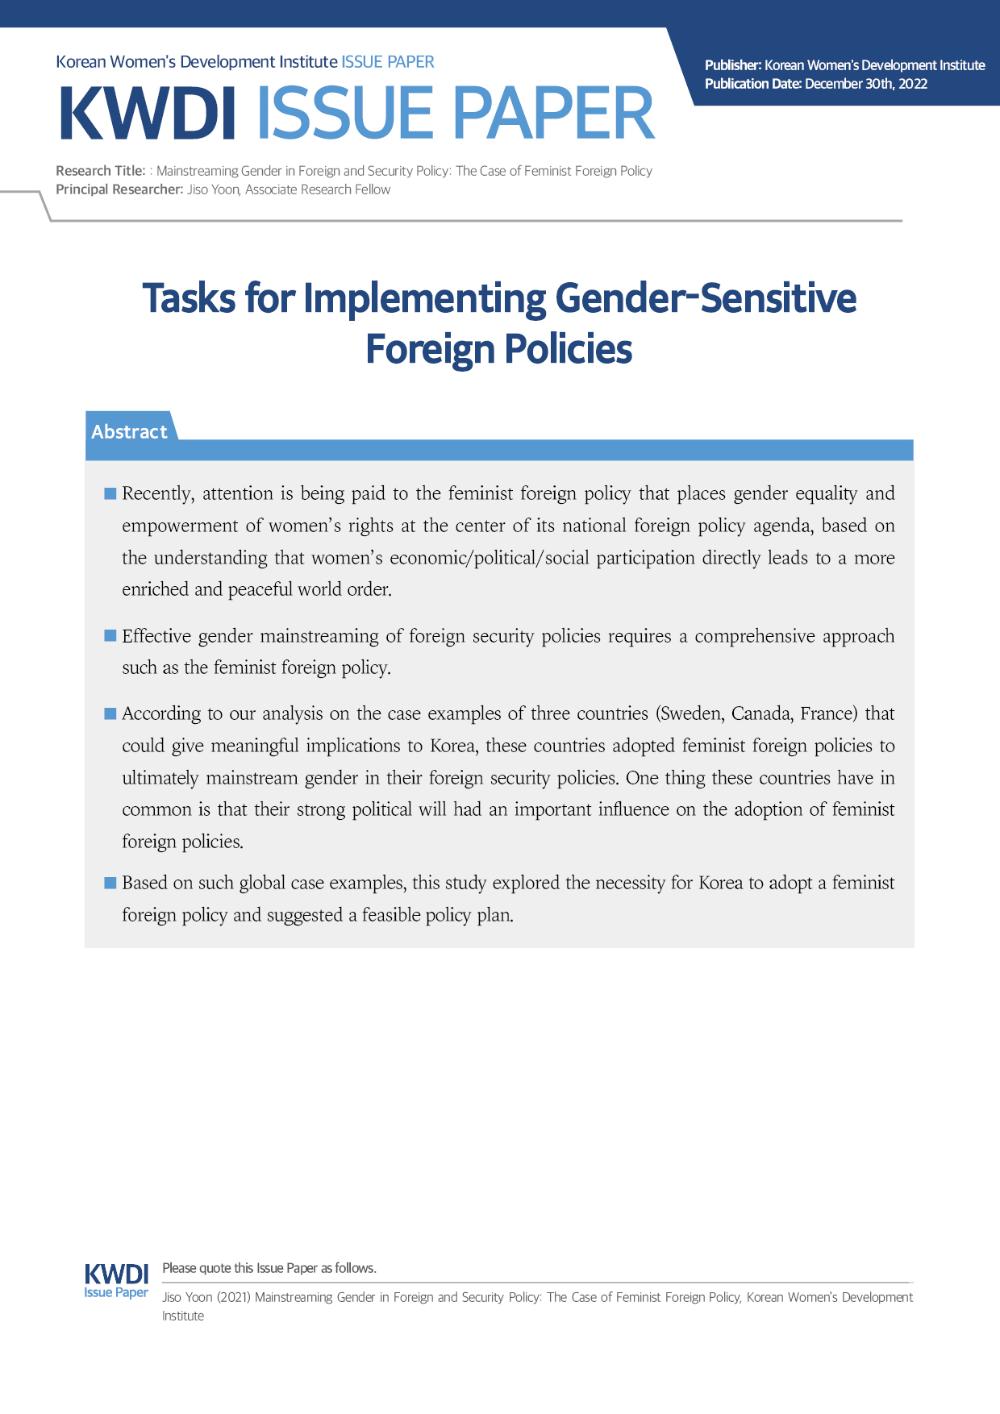 [Issue Paper] Tasks for Implementing Gender-Sensitive Foreign Policies